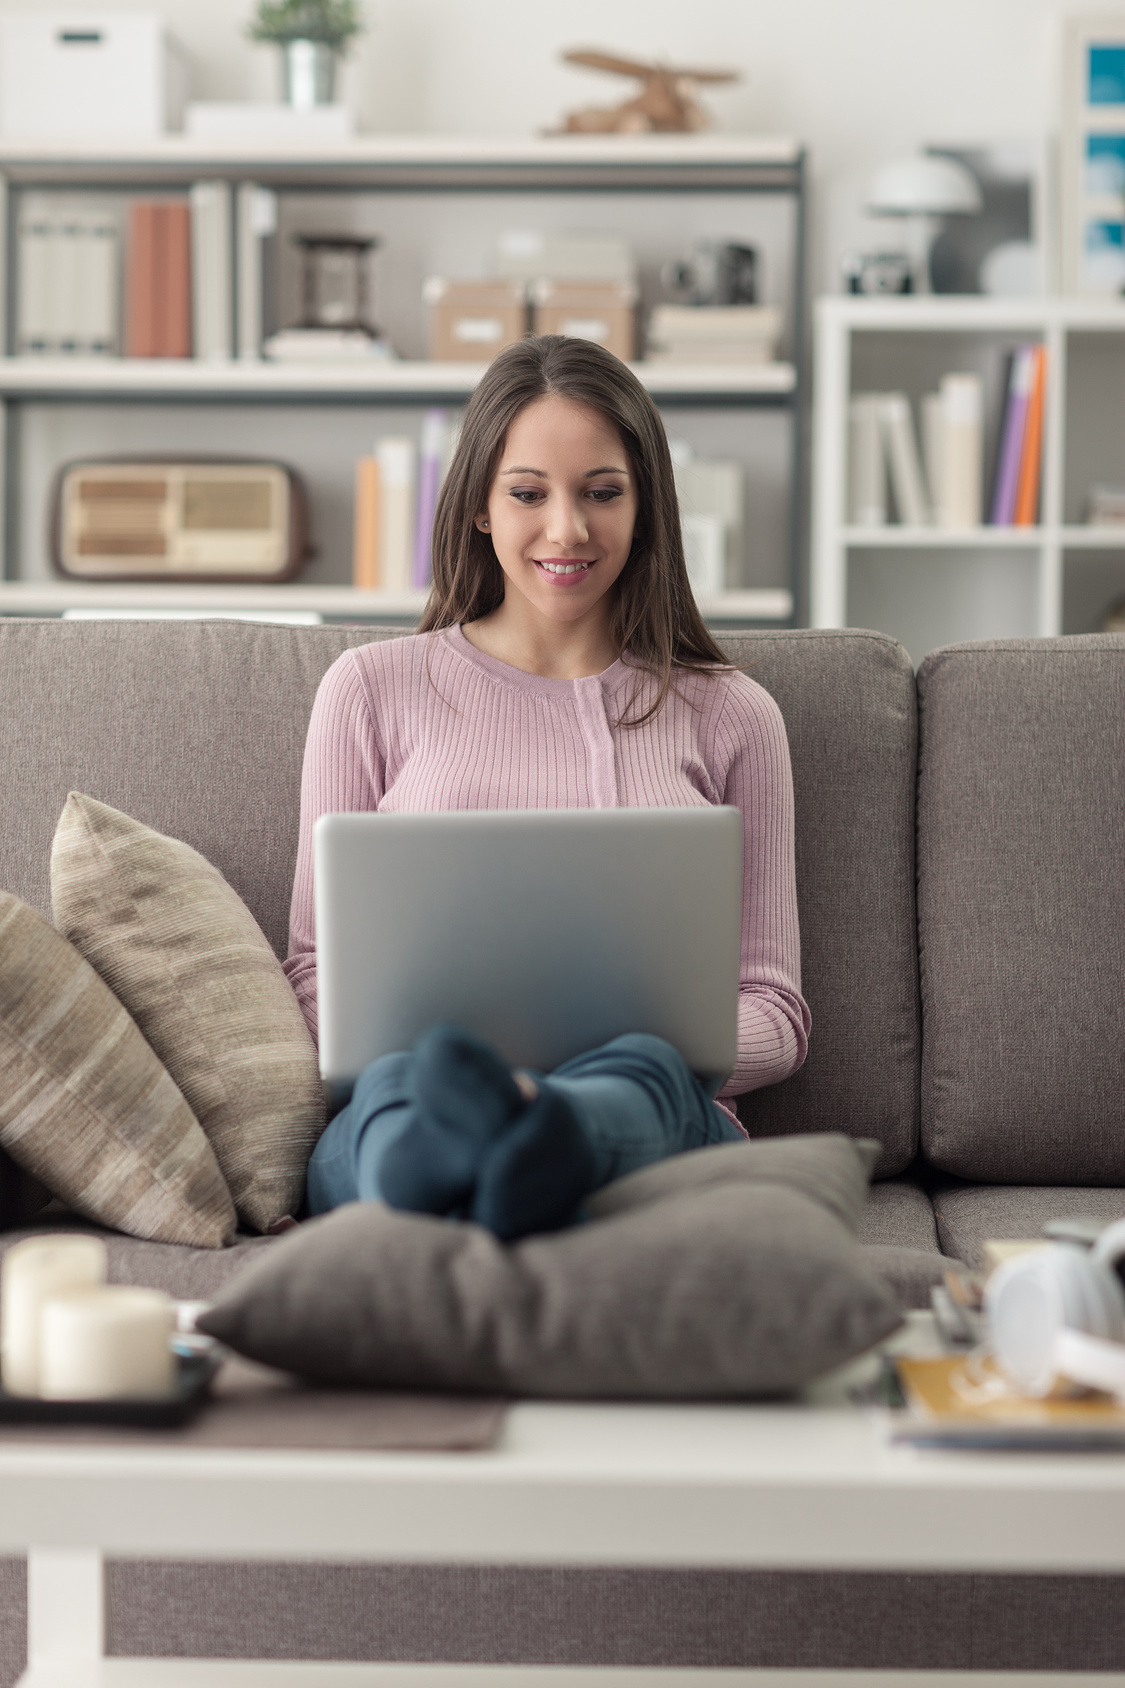 Young woman relaxing at home, she is sitting on the couch in the living room, using a laptop and social networking